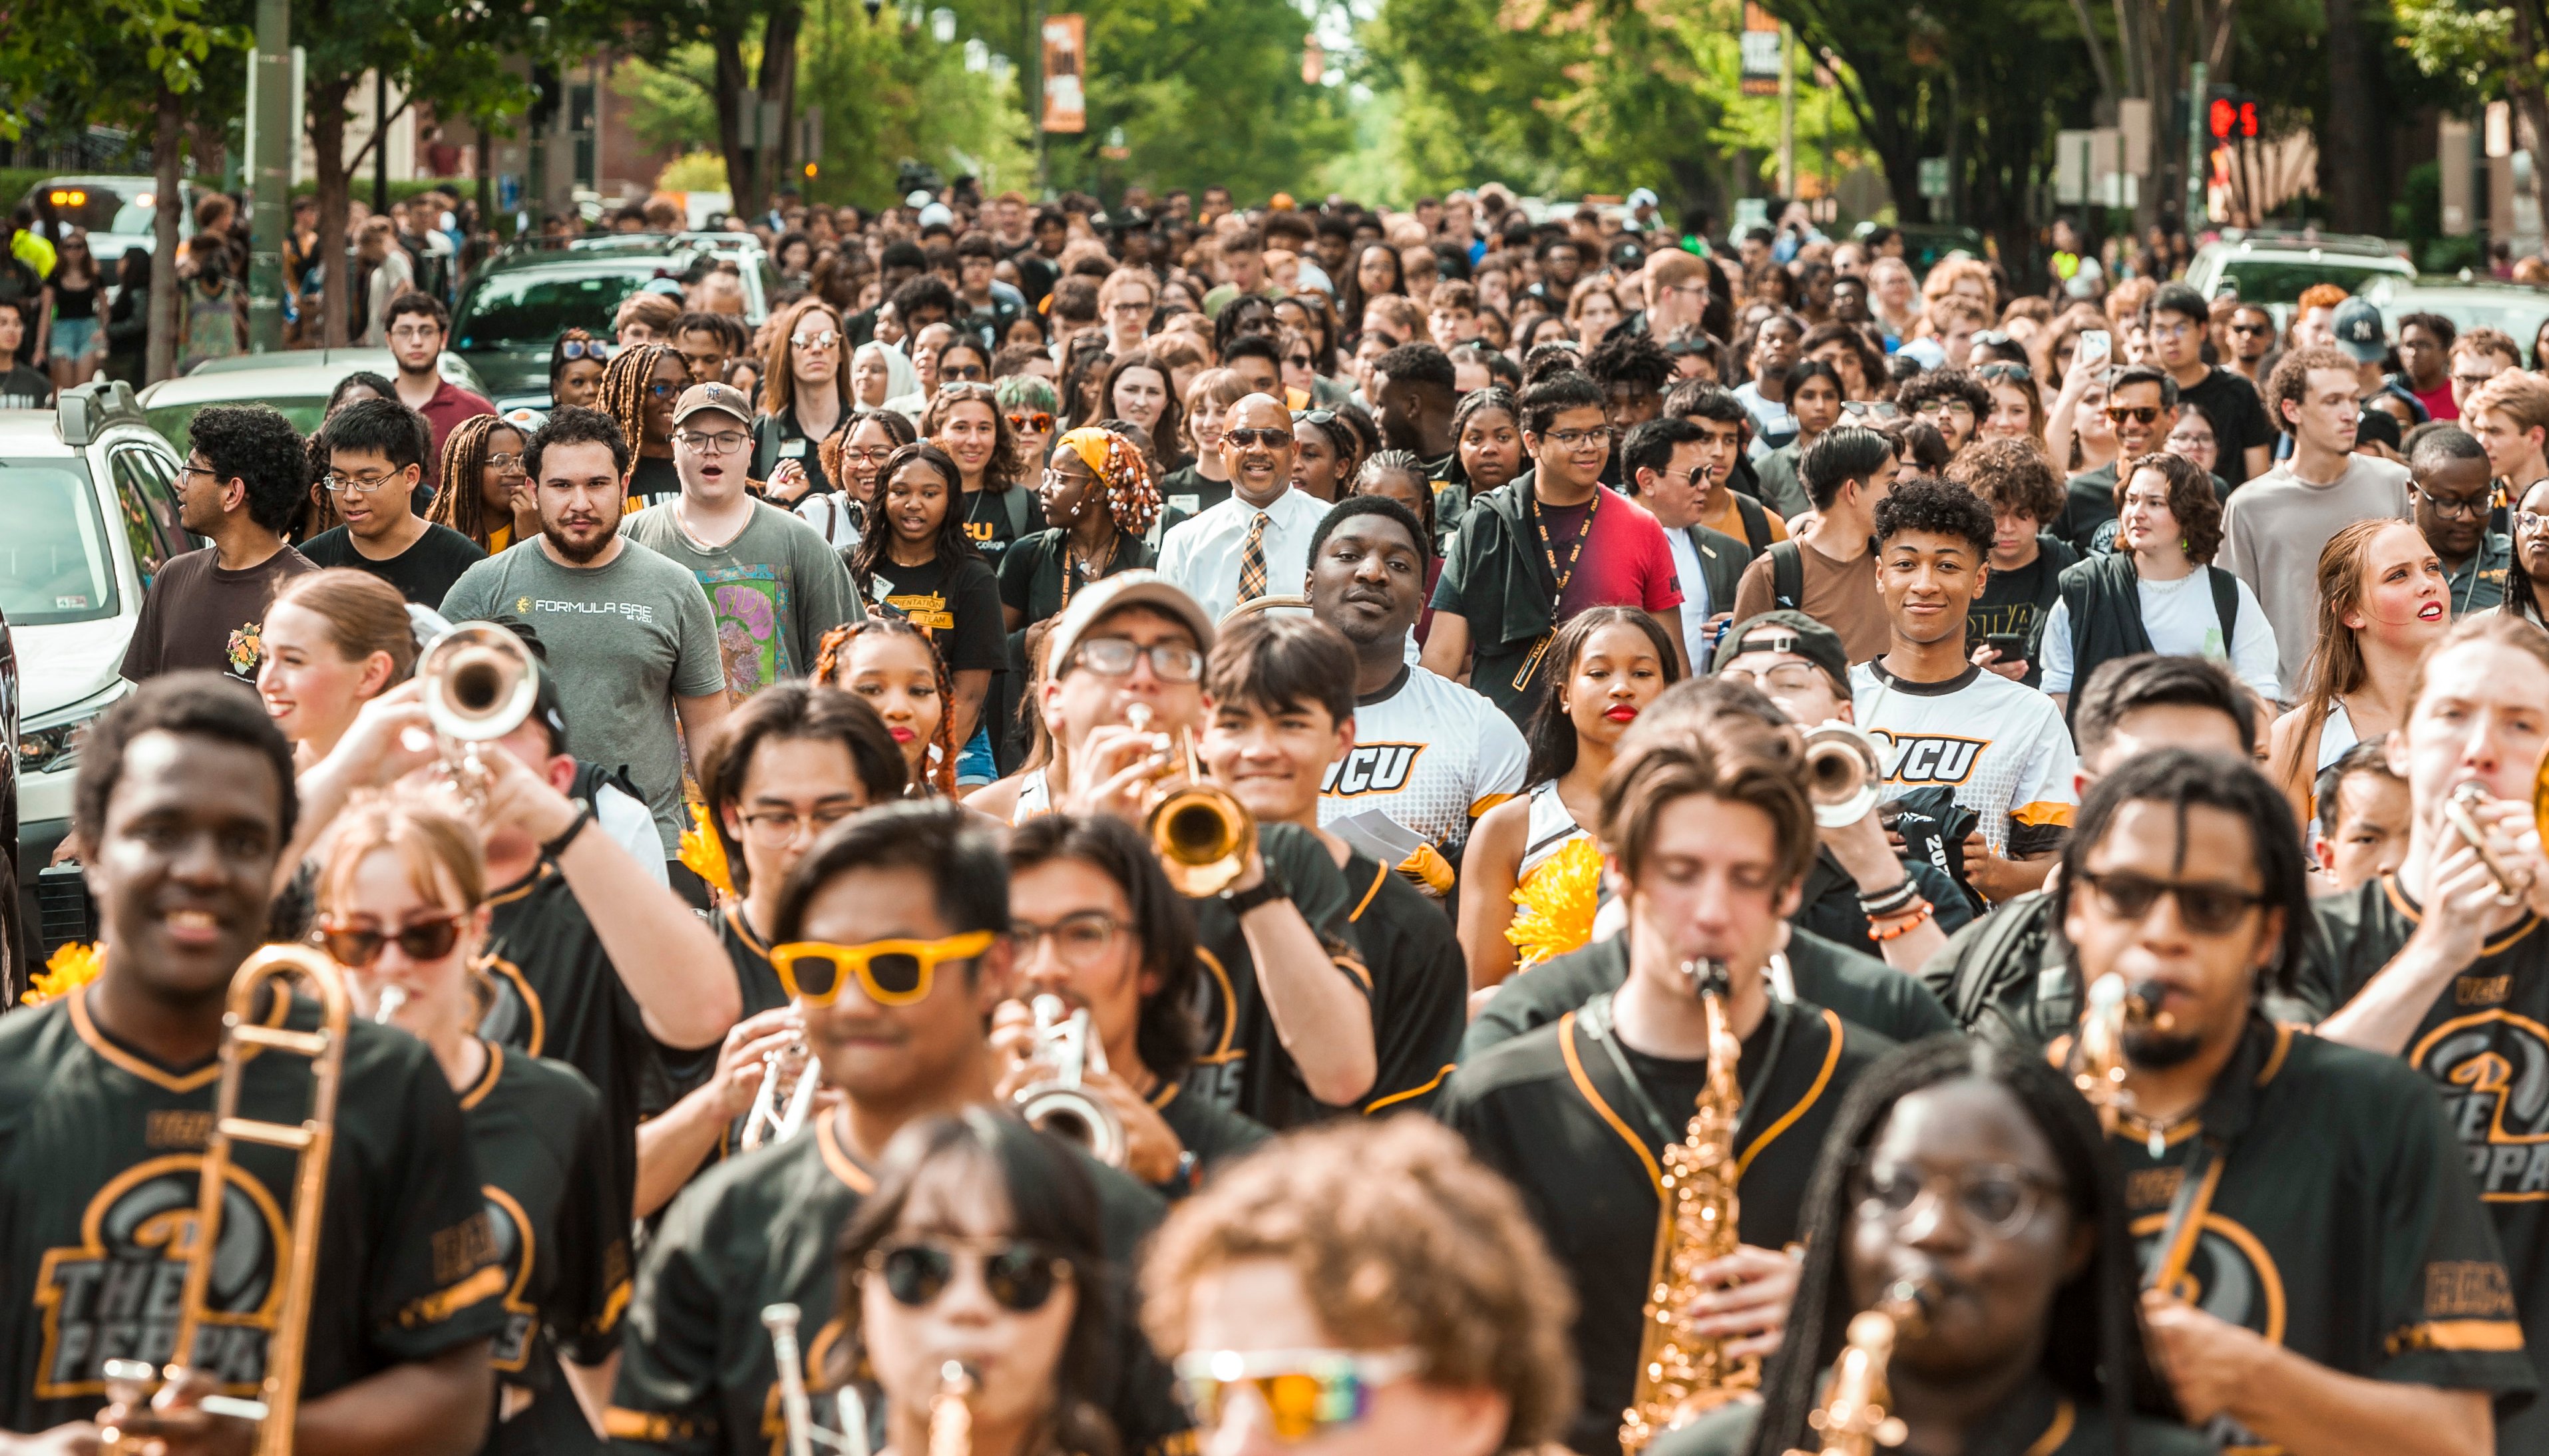 Read Convocation, Spirit Walk welcomes VCU’s newest students with fanfare, fun and food by VIRGINIA COMMONWEALTH UNIVERSITY